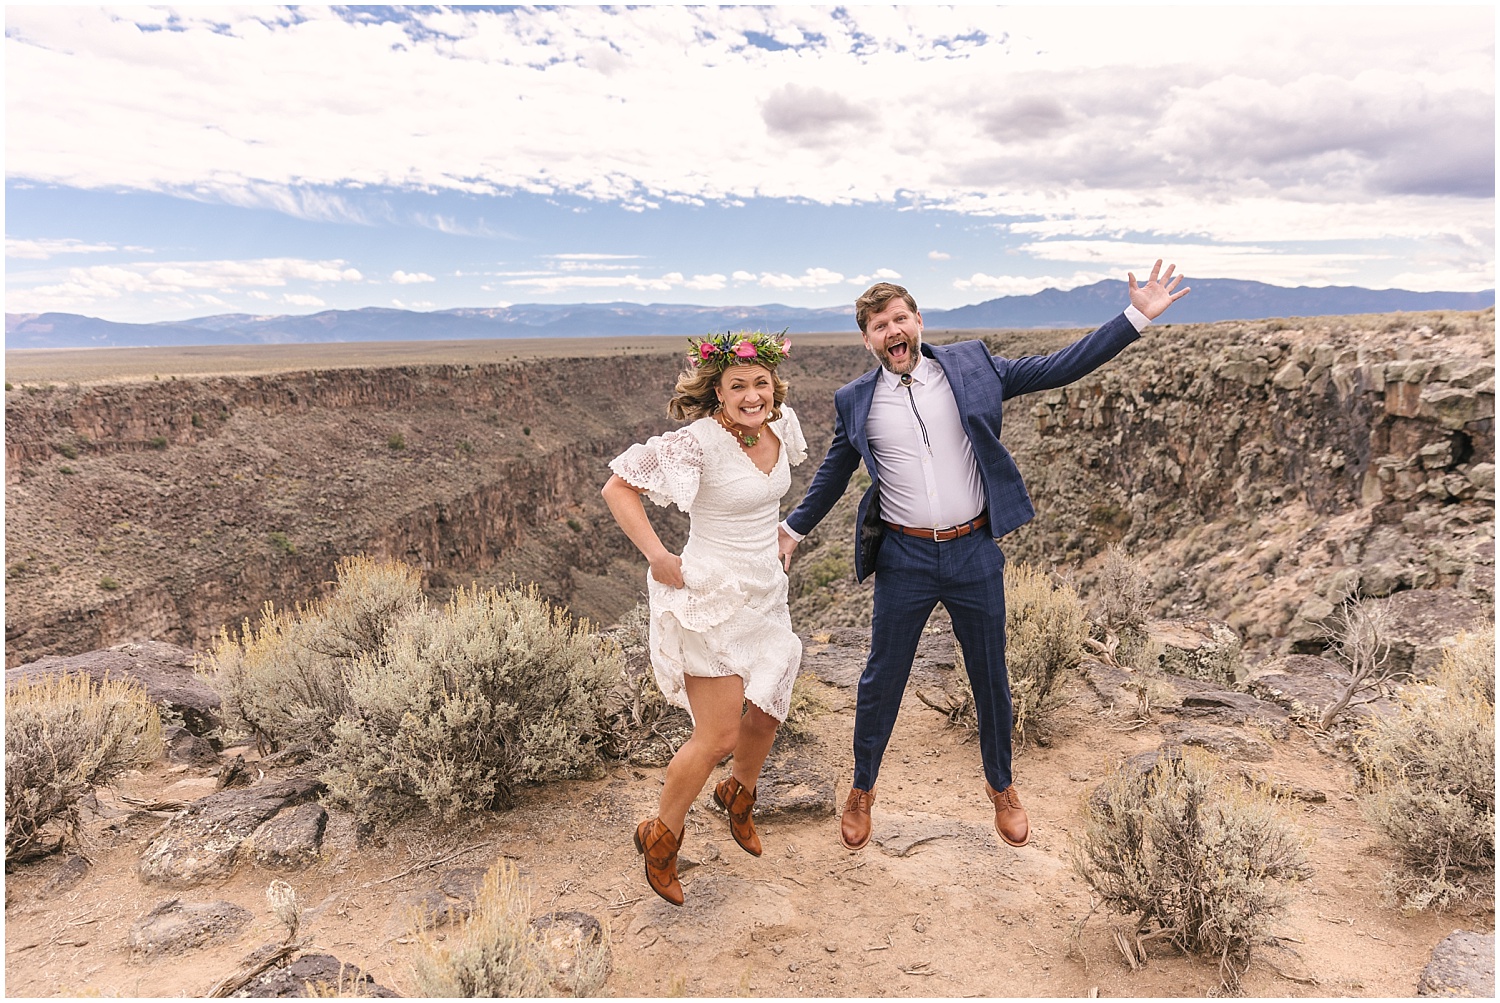 Bride and groom jumping for joy at the edge of the Rio Grande Gorge